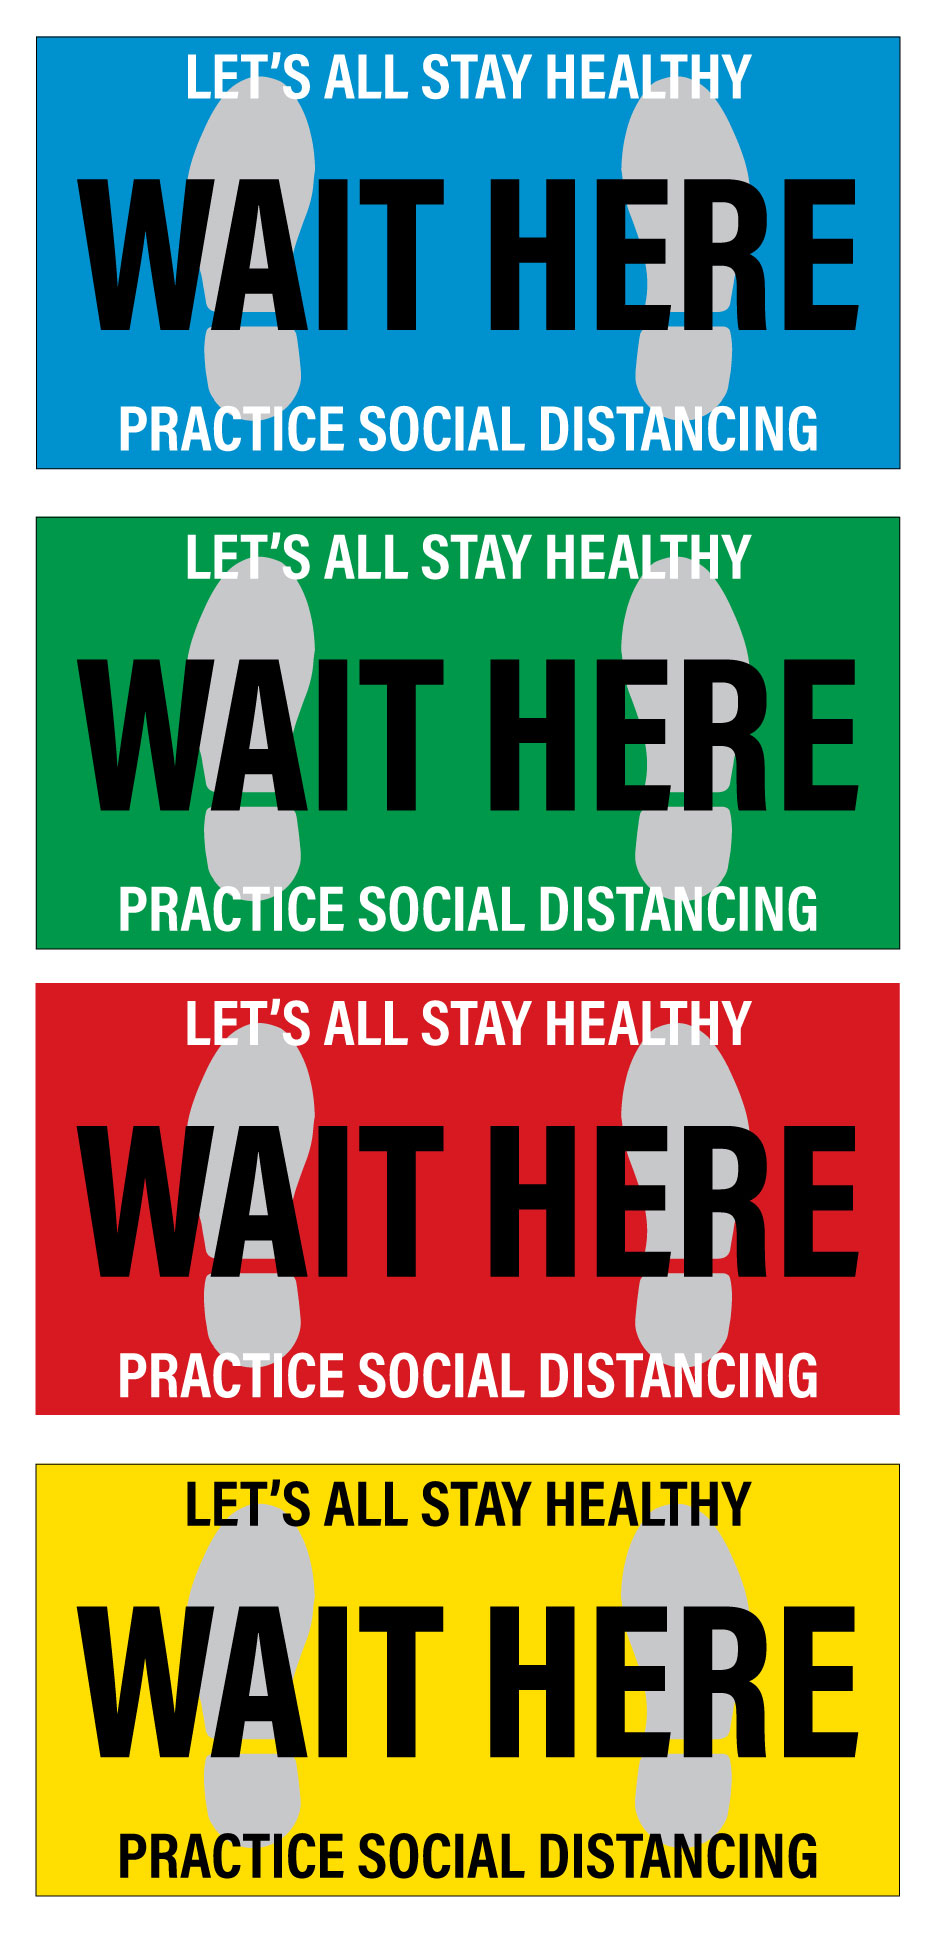 Please WAIT HERE Floor Graphics,12x24" (Specify color option in notes)